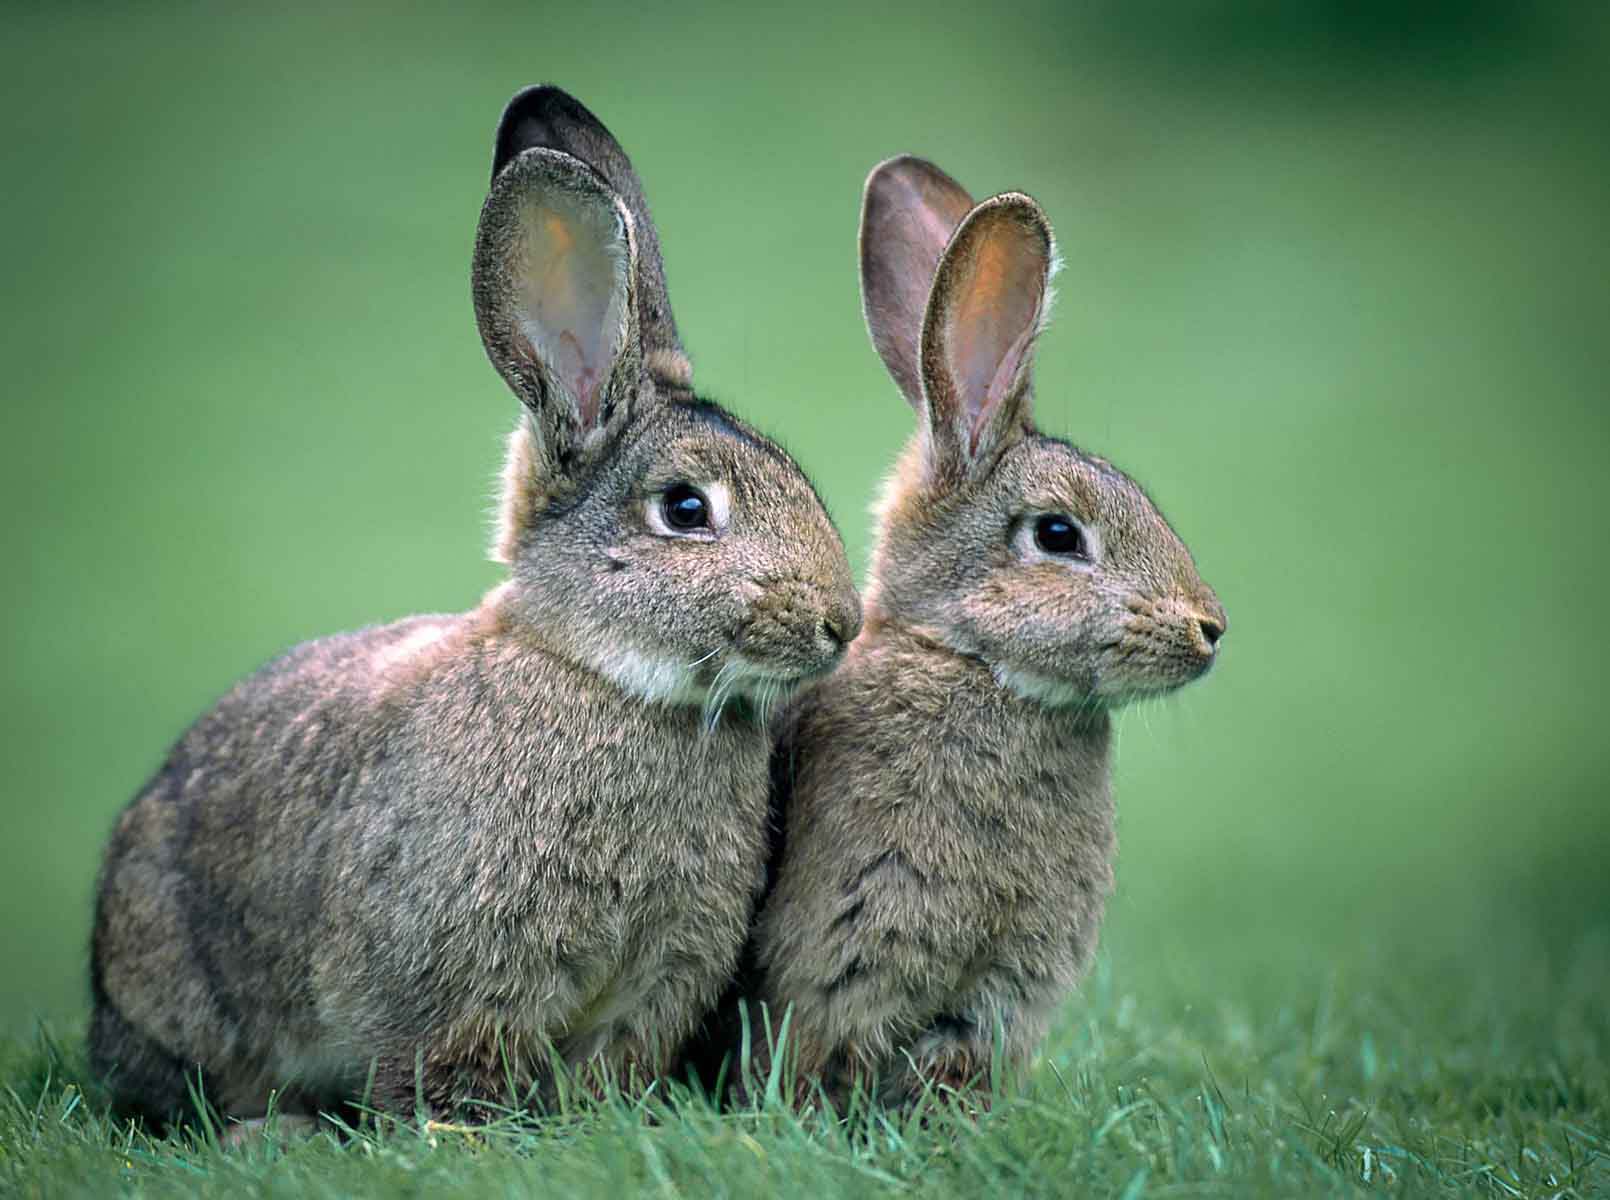 A pair of Bunnies Sitting in the Grass